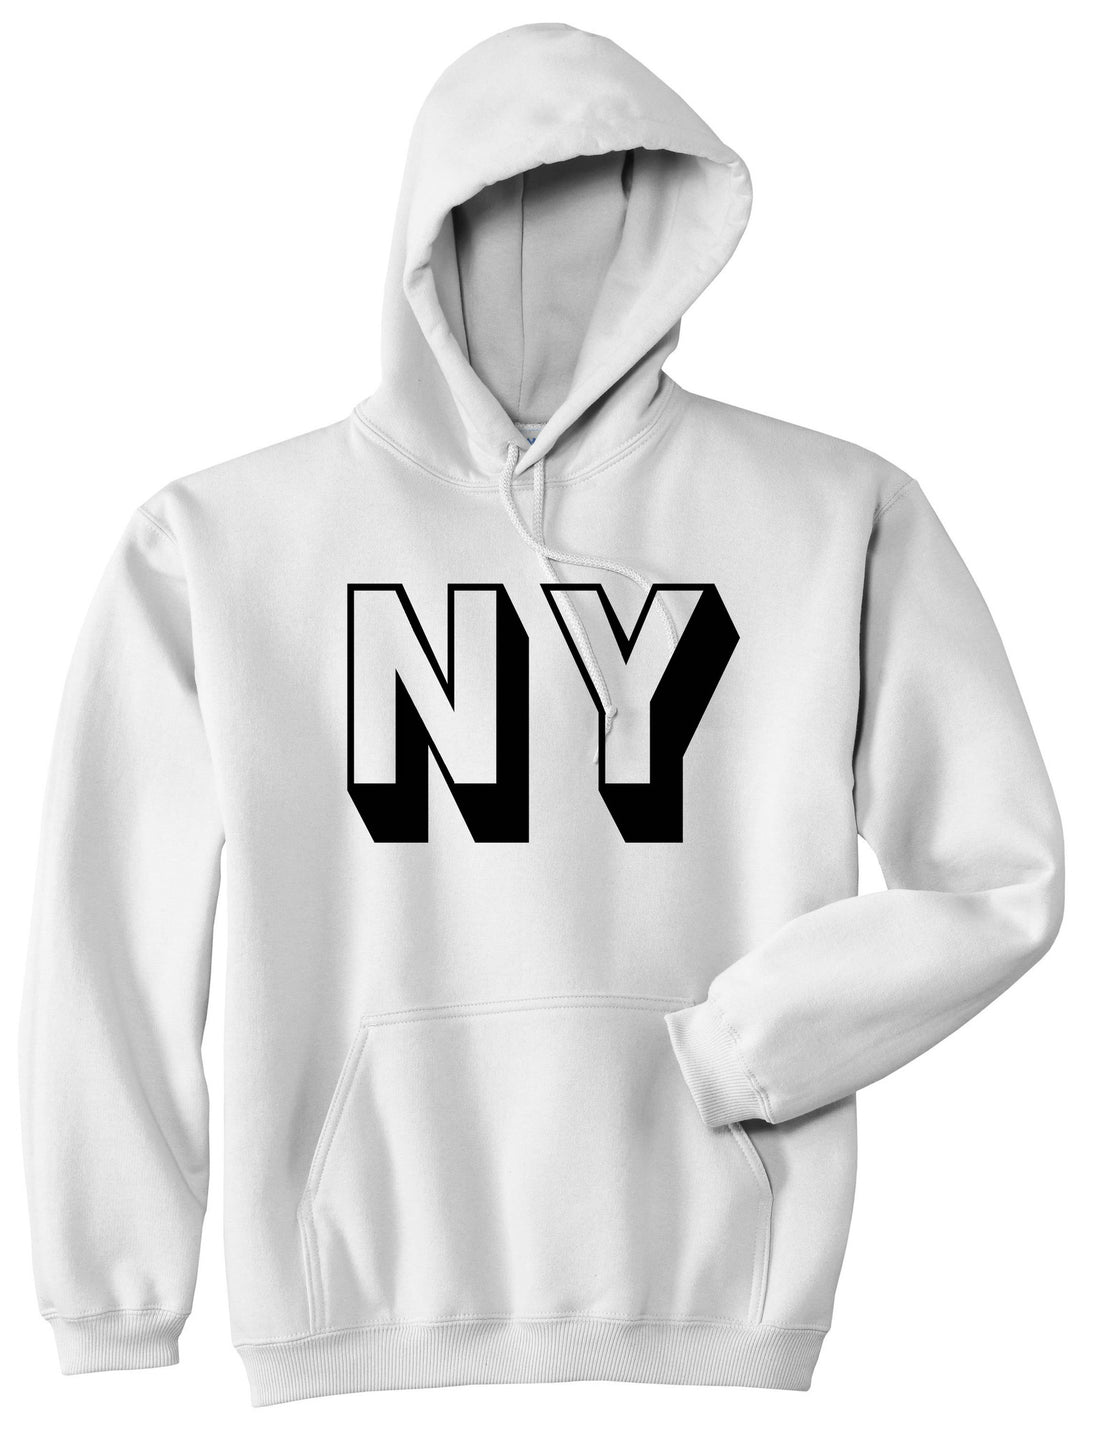 NY Block Letter New York Pullover Hoodie in White By Kings Of NY